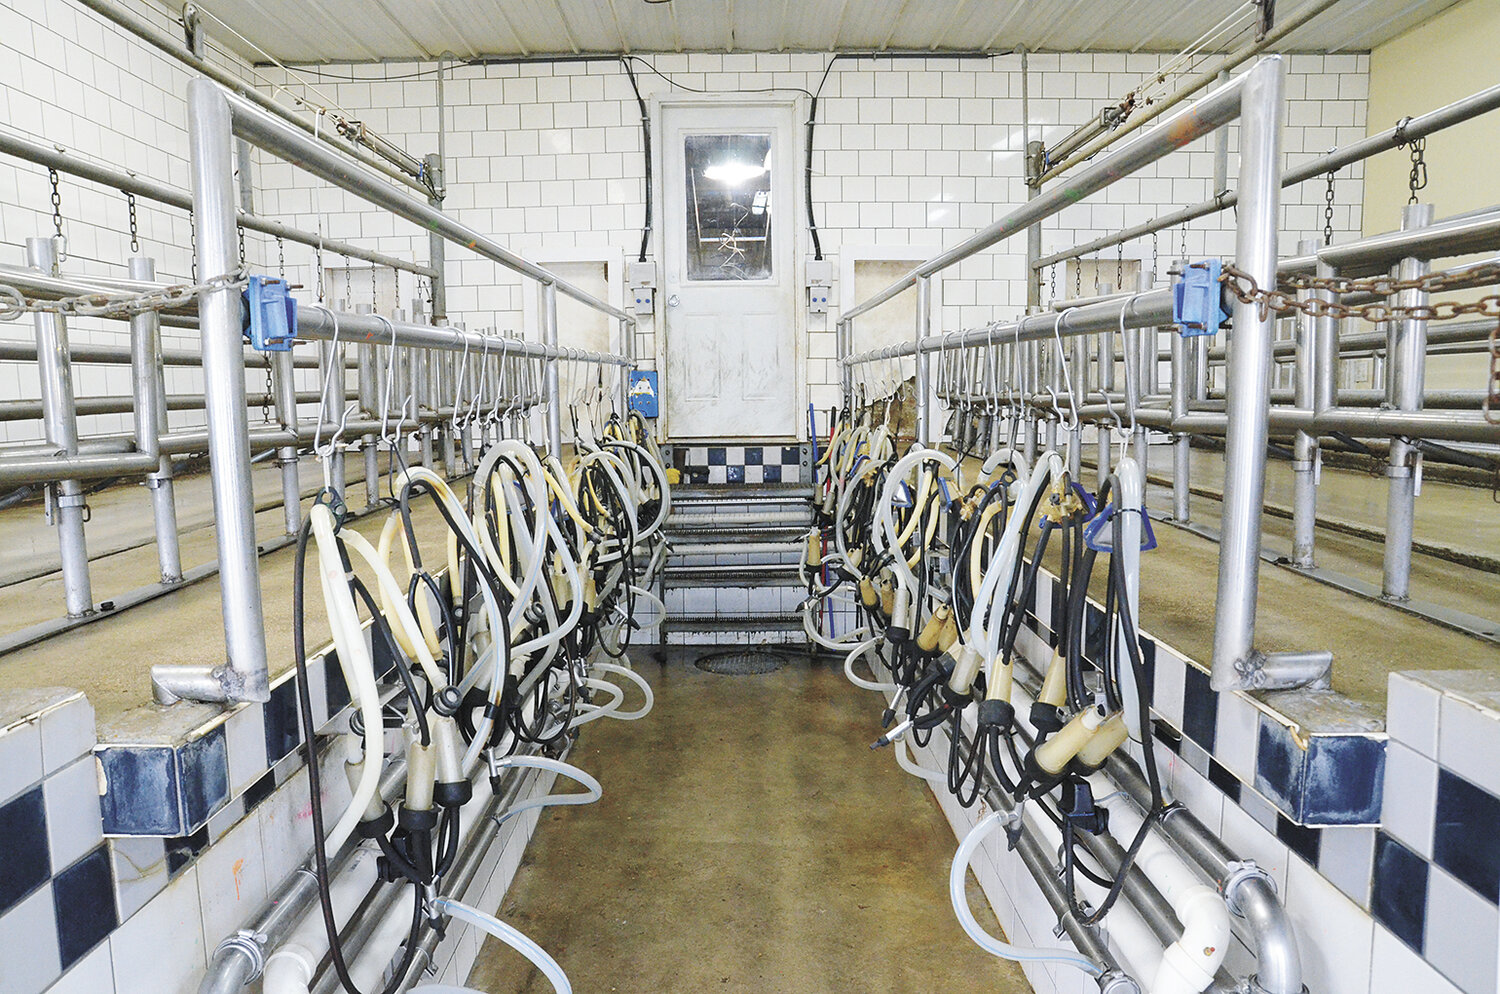 The Dooleys milk their goats twice a day in a double-15 parallel parlor that was completed in 2000 on their farm near Orfordville, Wisconsin. At the time it was built, there were few new facilities for commercial goat herds in Wisconsin.